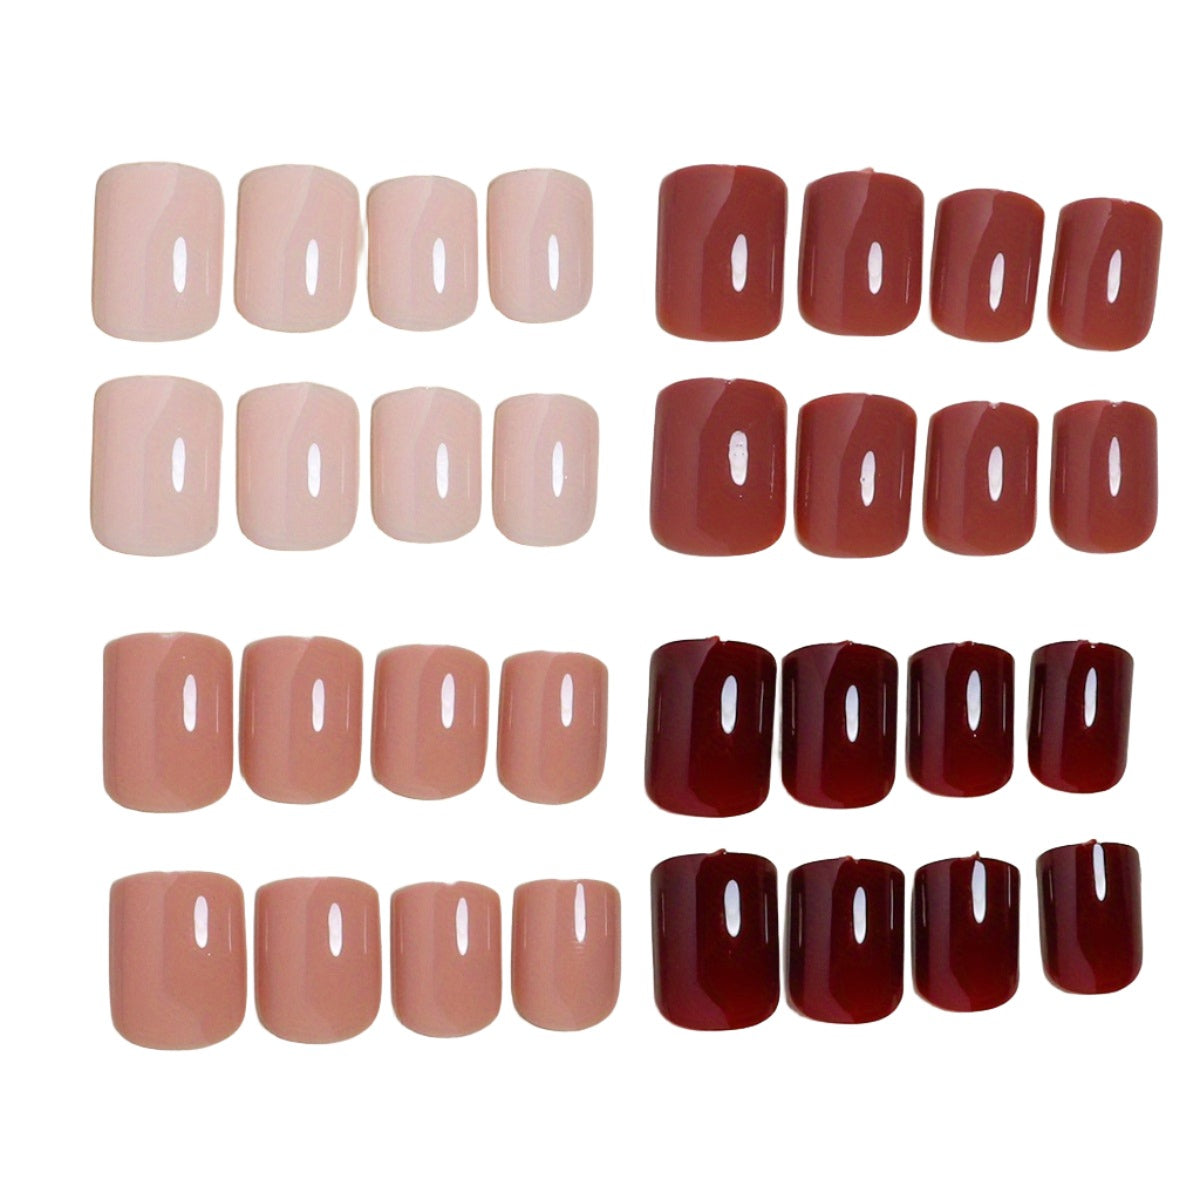 4 Packs Chic Glossy Square Press-On Nails - Mixed Pink Brown - Full Cover Acrylic Set with Adhesive Tabs & Nail File